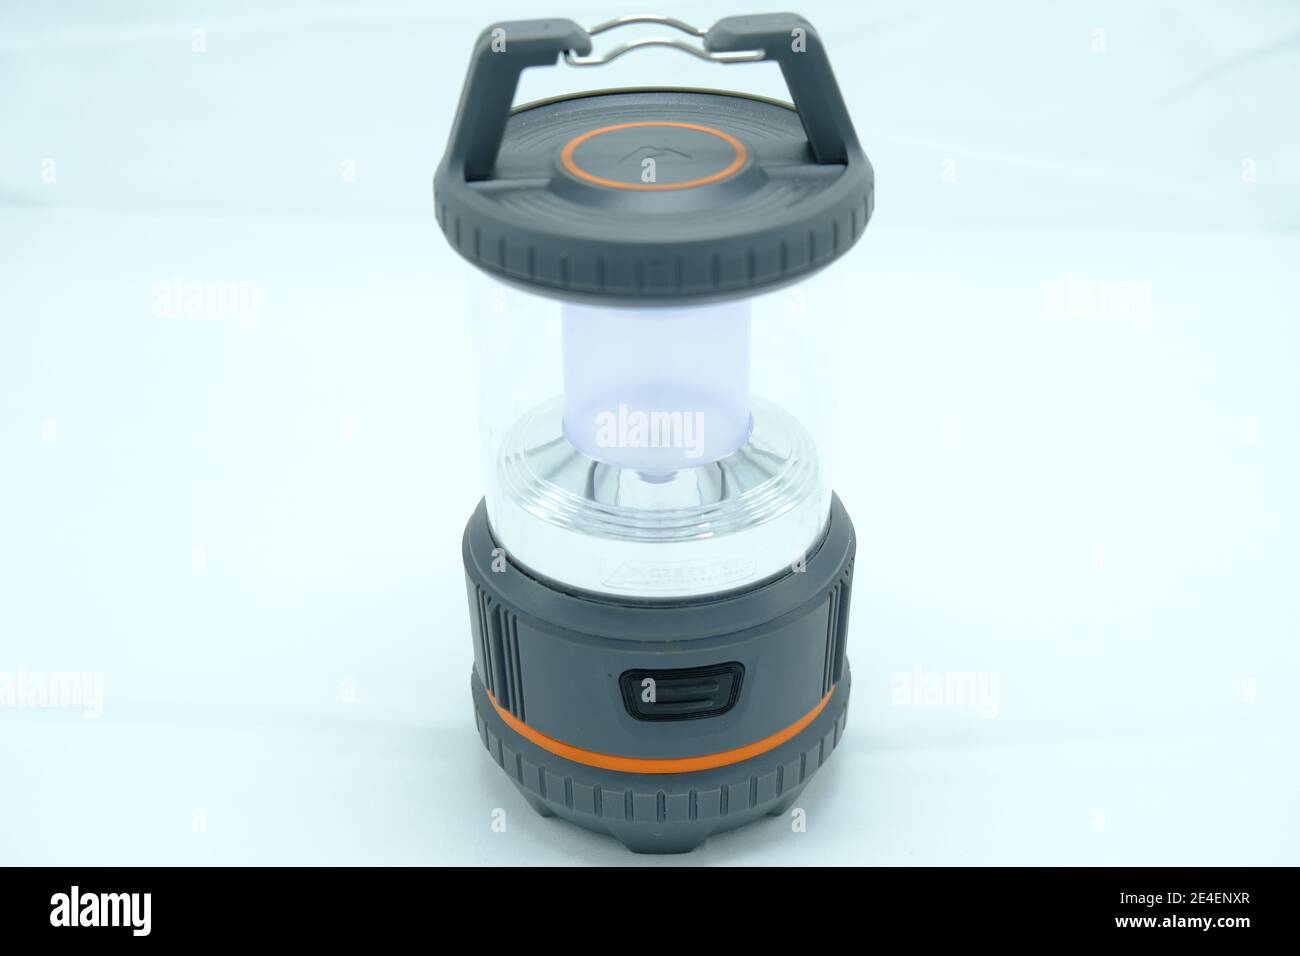 This is a stock photograph of a Ozark Trail brand Camping Lamp on